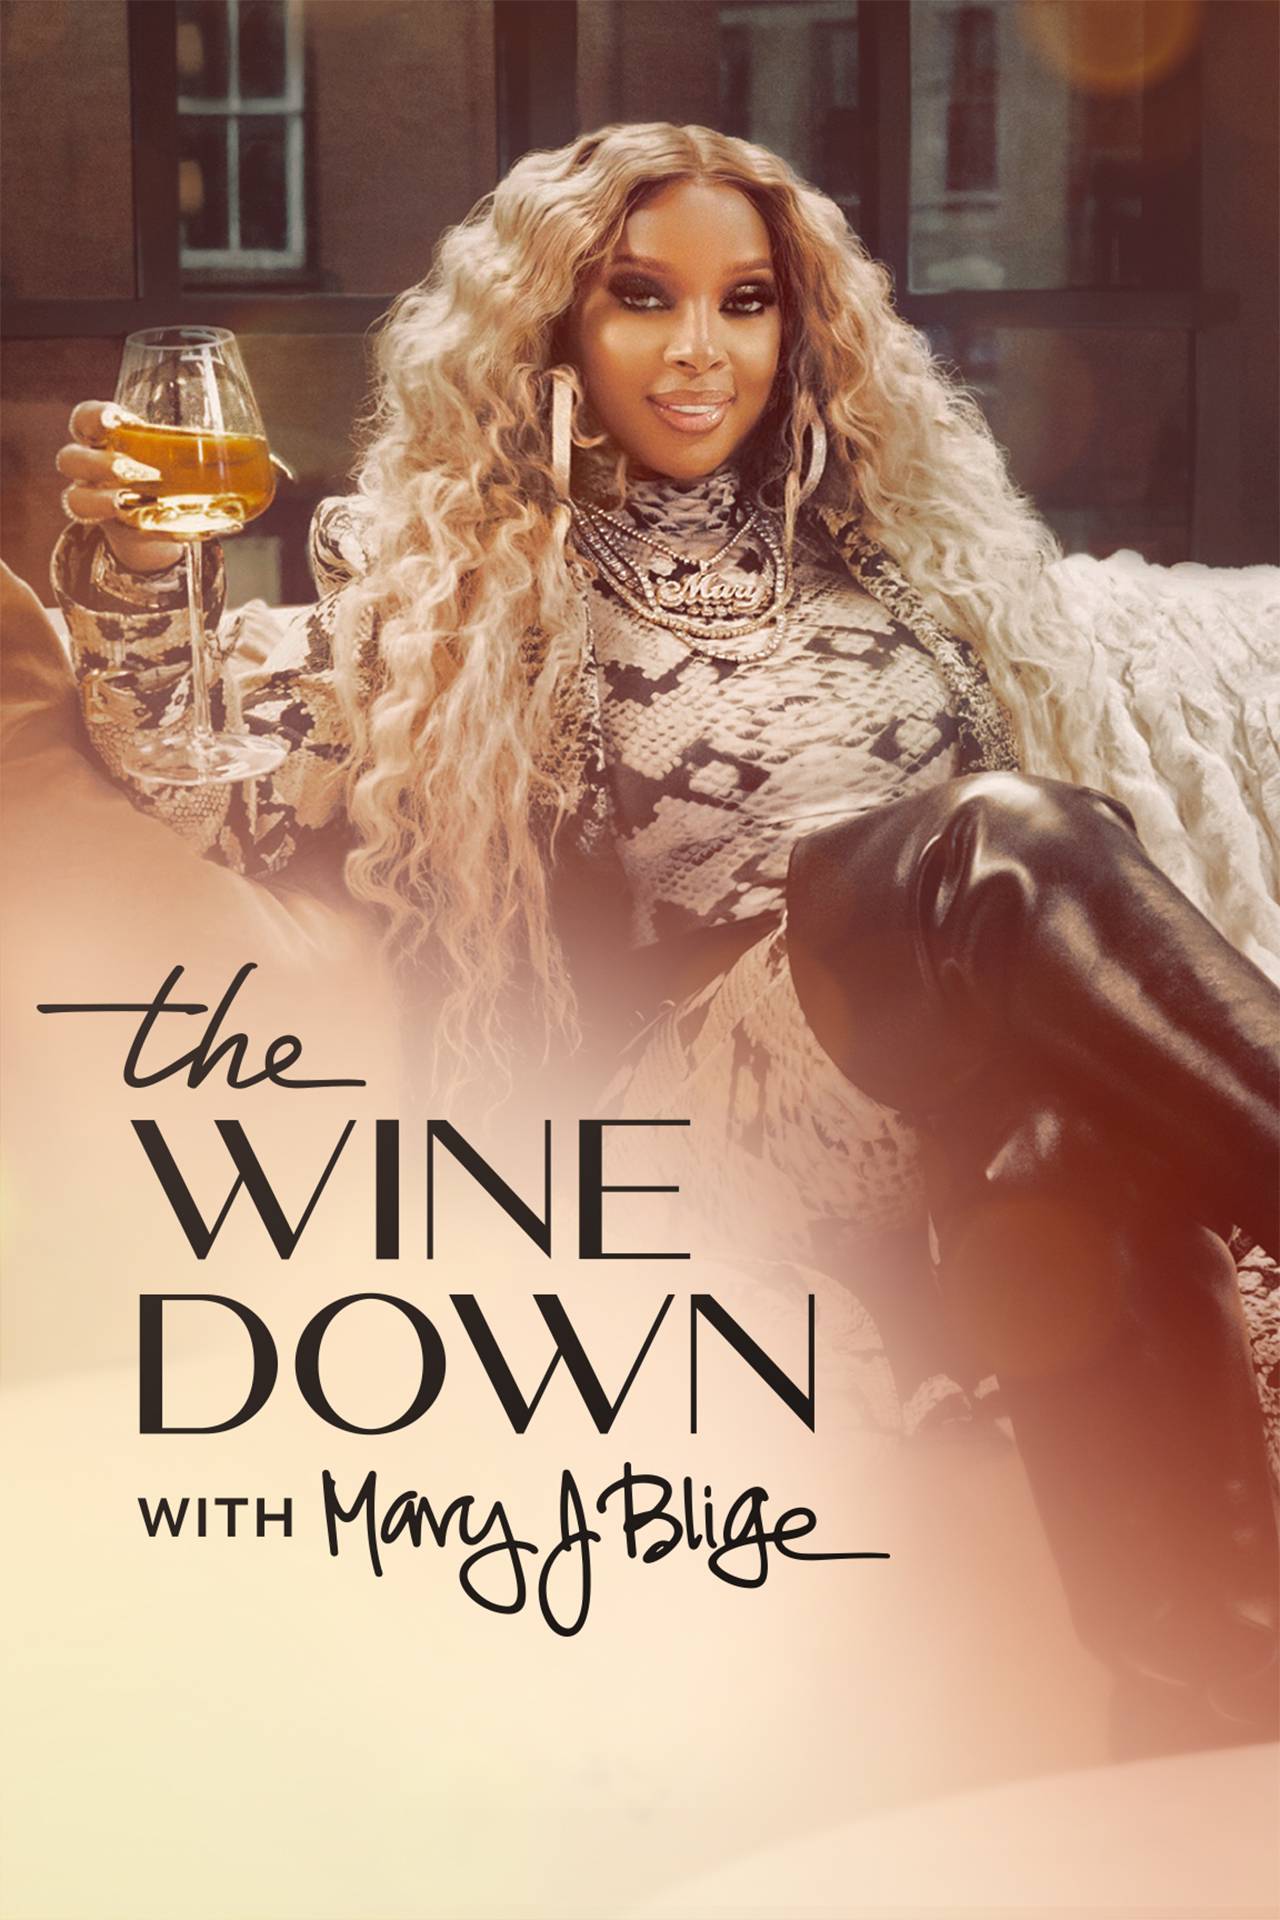 Mary J. Blige and Nas dish on 25 years of highs and lows together